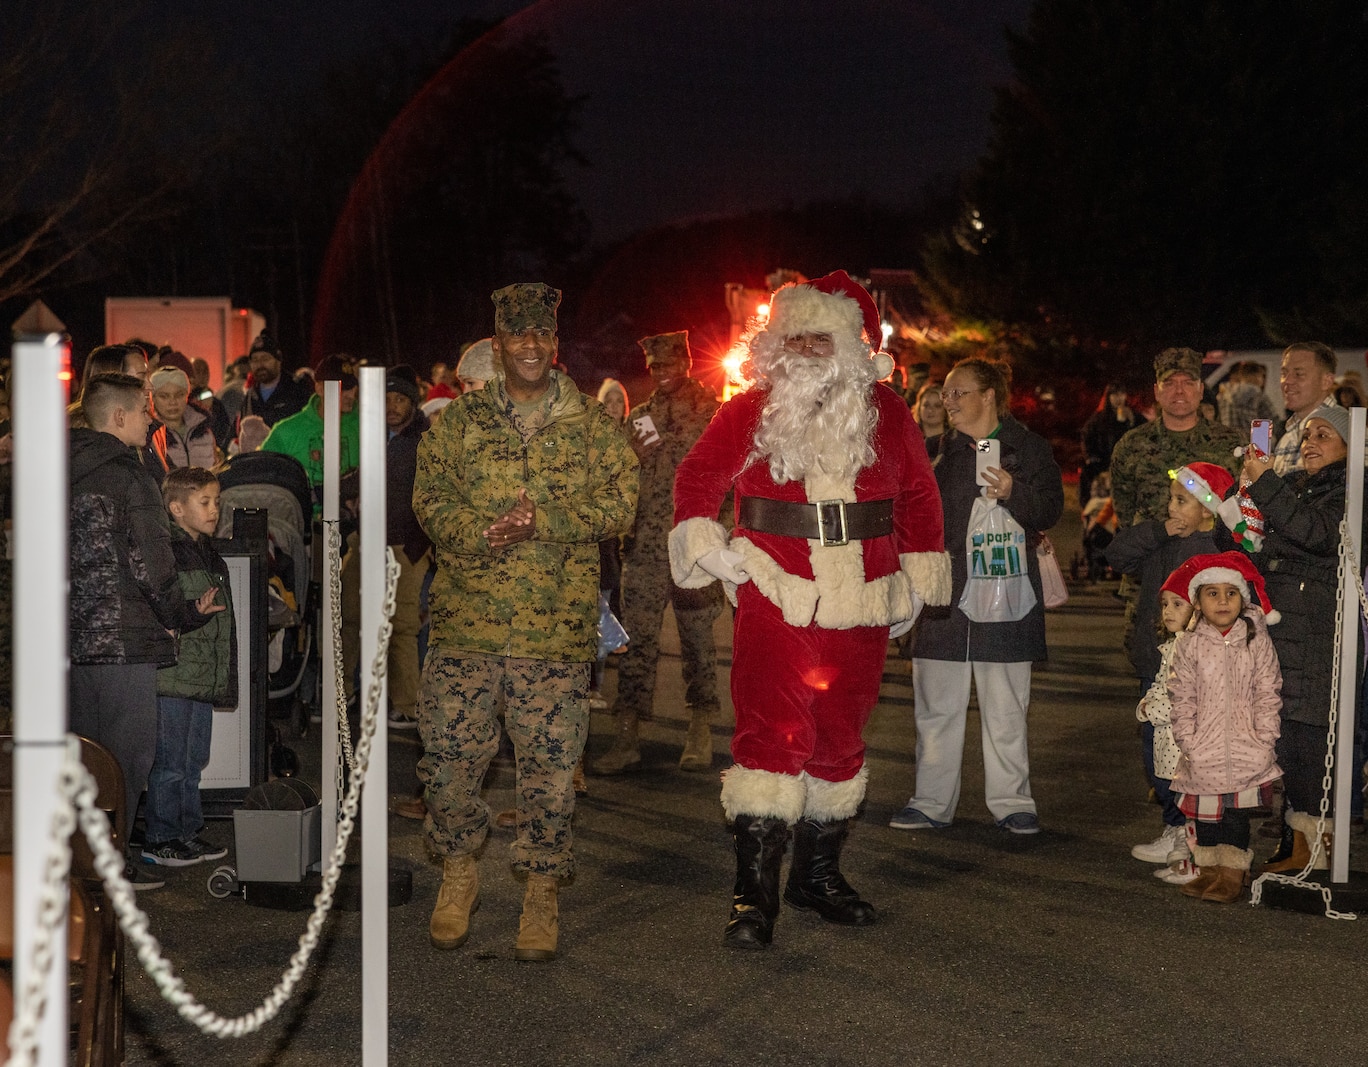 U.S. Marine Corps Col. Michael L. Brooks, base commander, Marine Corps Base Quantico, walks with Santa during the annual Quantico holiday tree lighting at the Marine Corps Exchange parking lot on Marine Corps Base Quantico, Virginia, Dec. 7, 2023. The festivities included a roller-skating rink, snowball fighting, games for children, music performances, and vendor booths all to celebrate the holiday season. (U.S. Marine Corps Photo by Lance Cpl. Kayla LeClaire)